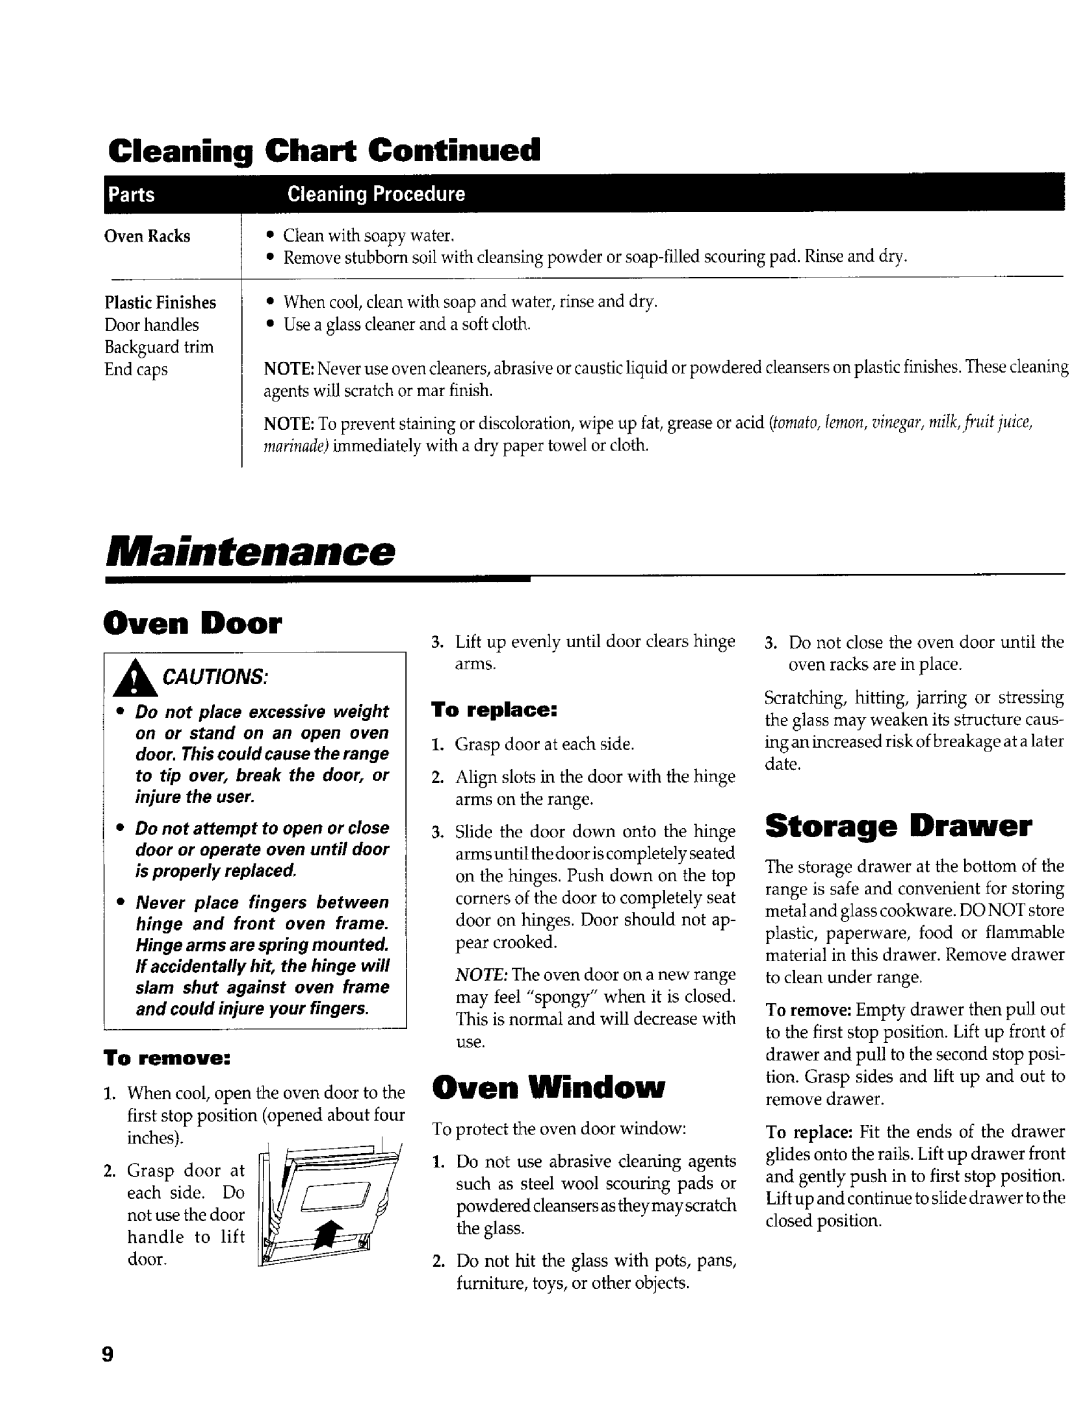 Maytag PER4510 warranty Maintenance, Storage Drawer, Cleaning, Chart, Continued, Oven Door, Acautions, Procedure, To remove 